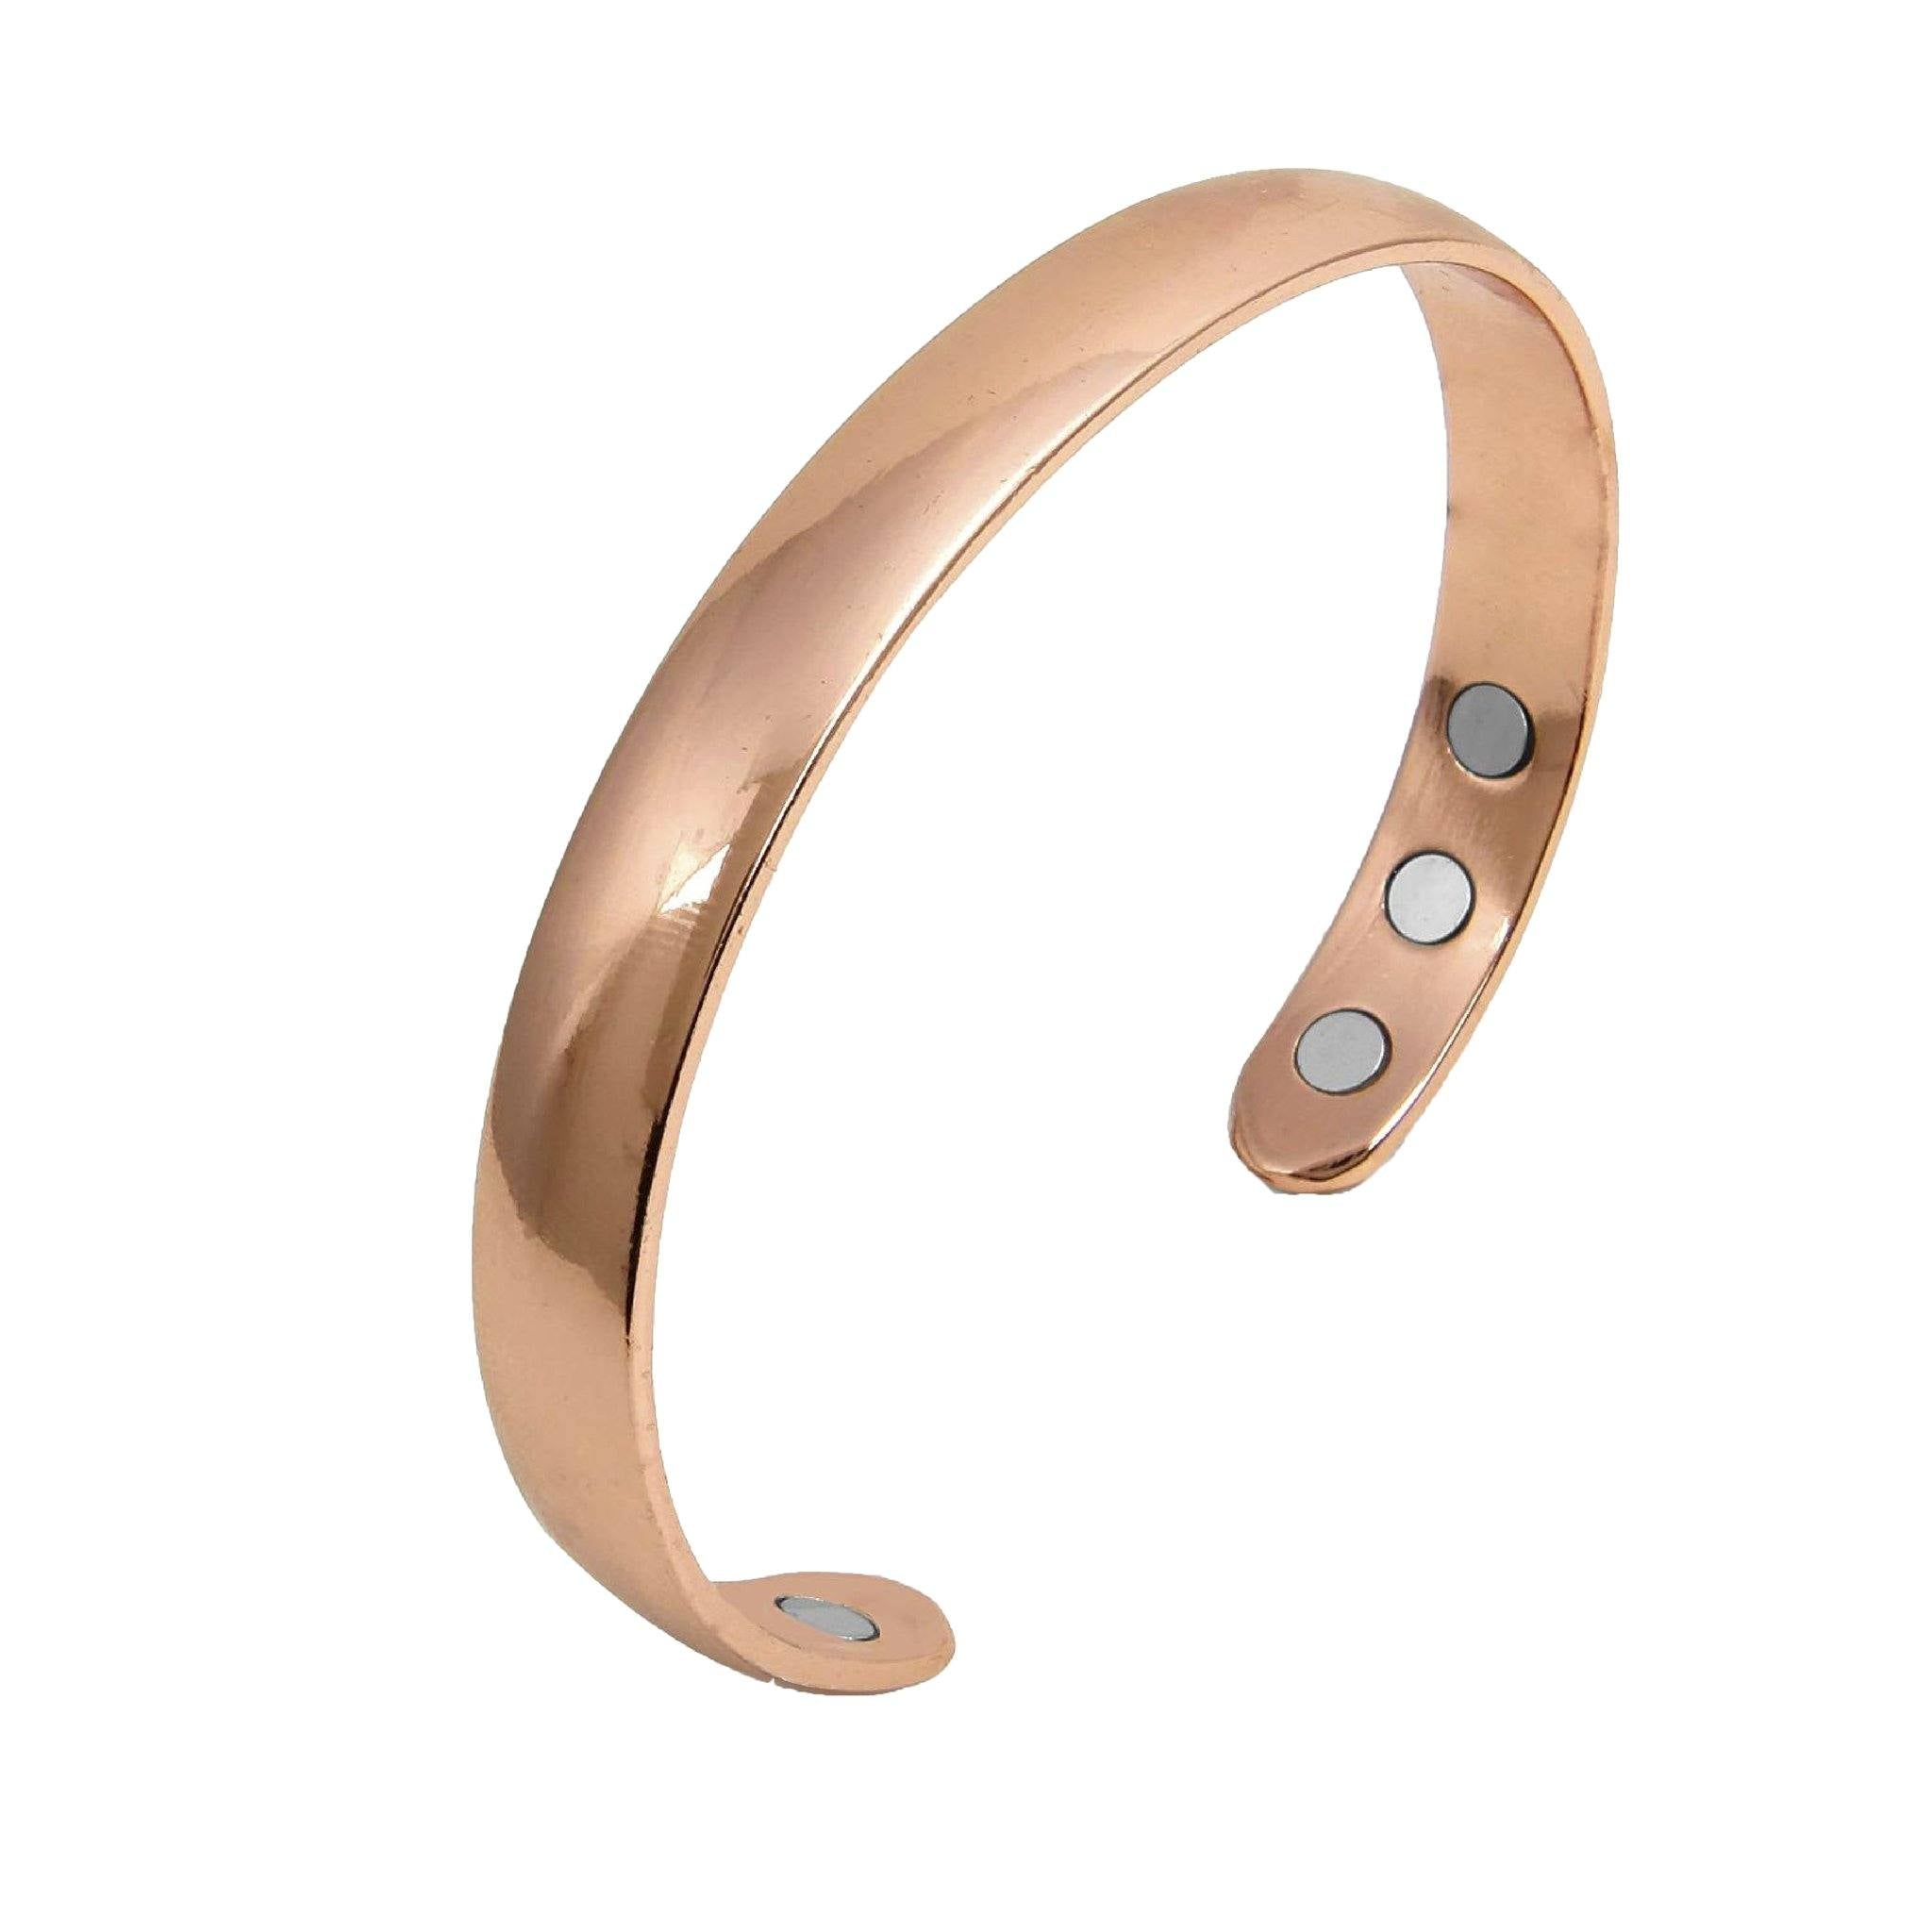 Men's Bracelet Magnetic Therapy Arthritis Pain Relief Pure Solid Copper  Bangle | eBay